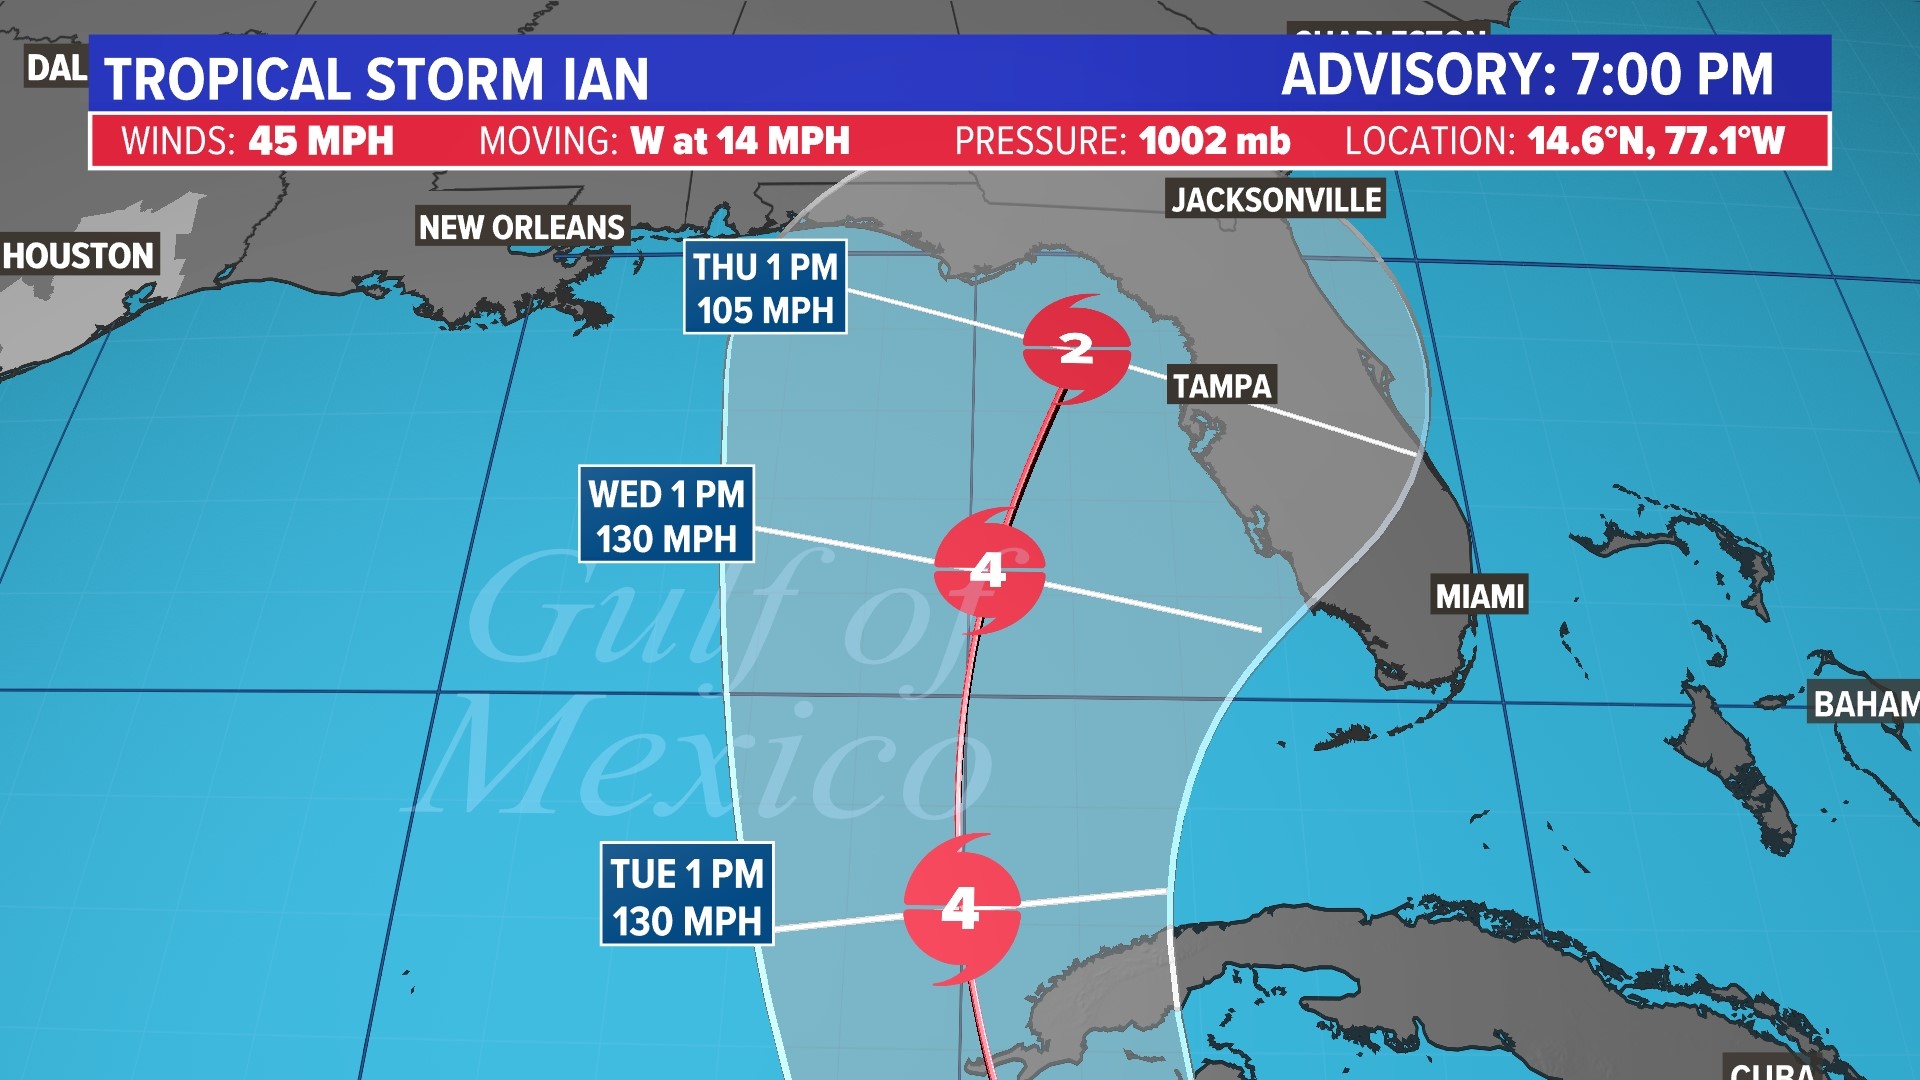 Tropical Storm Ian continues to move through the Caribbean on its way to the Gulf of Mexico.